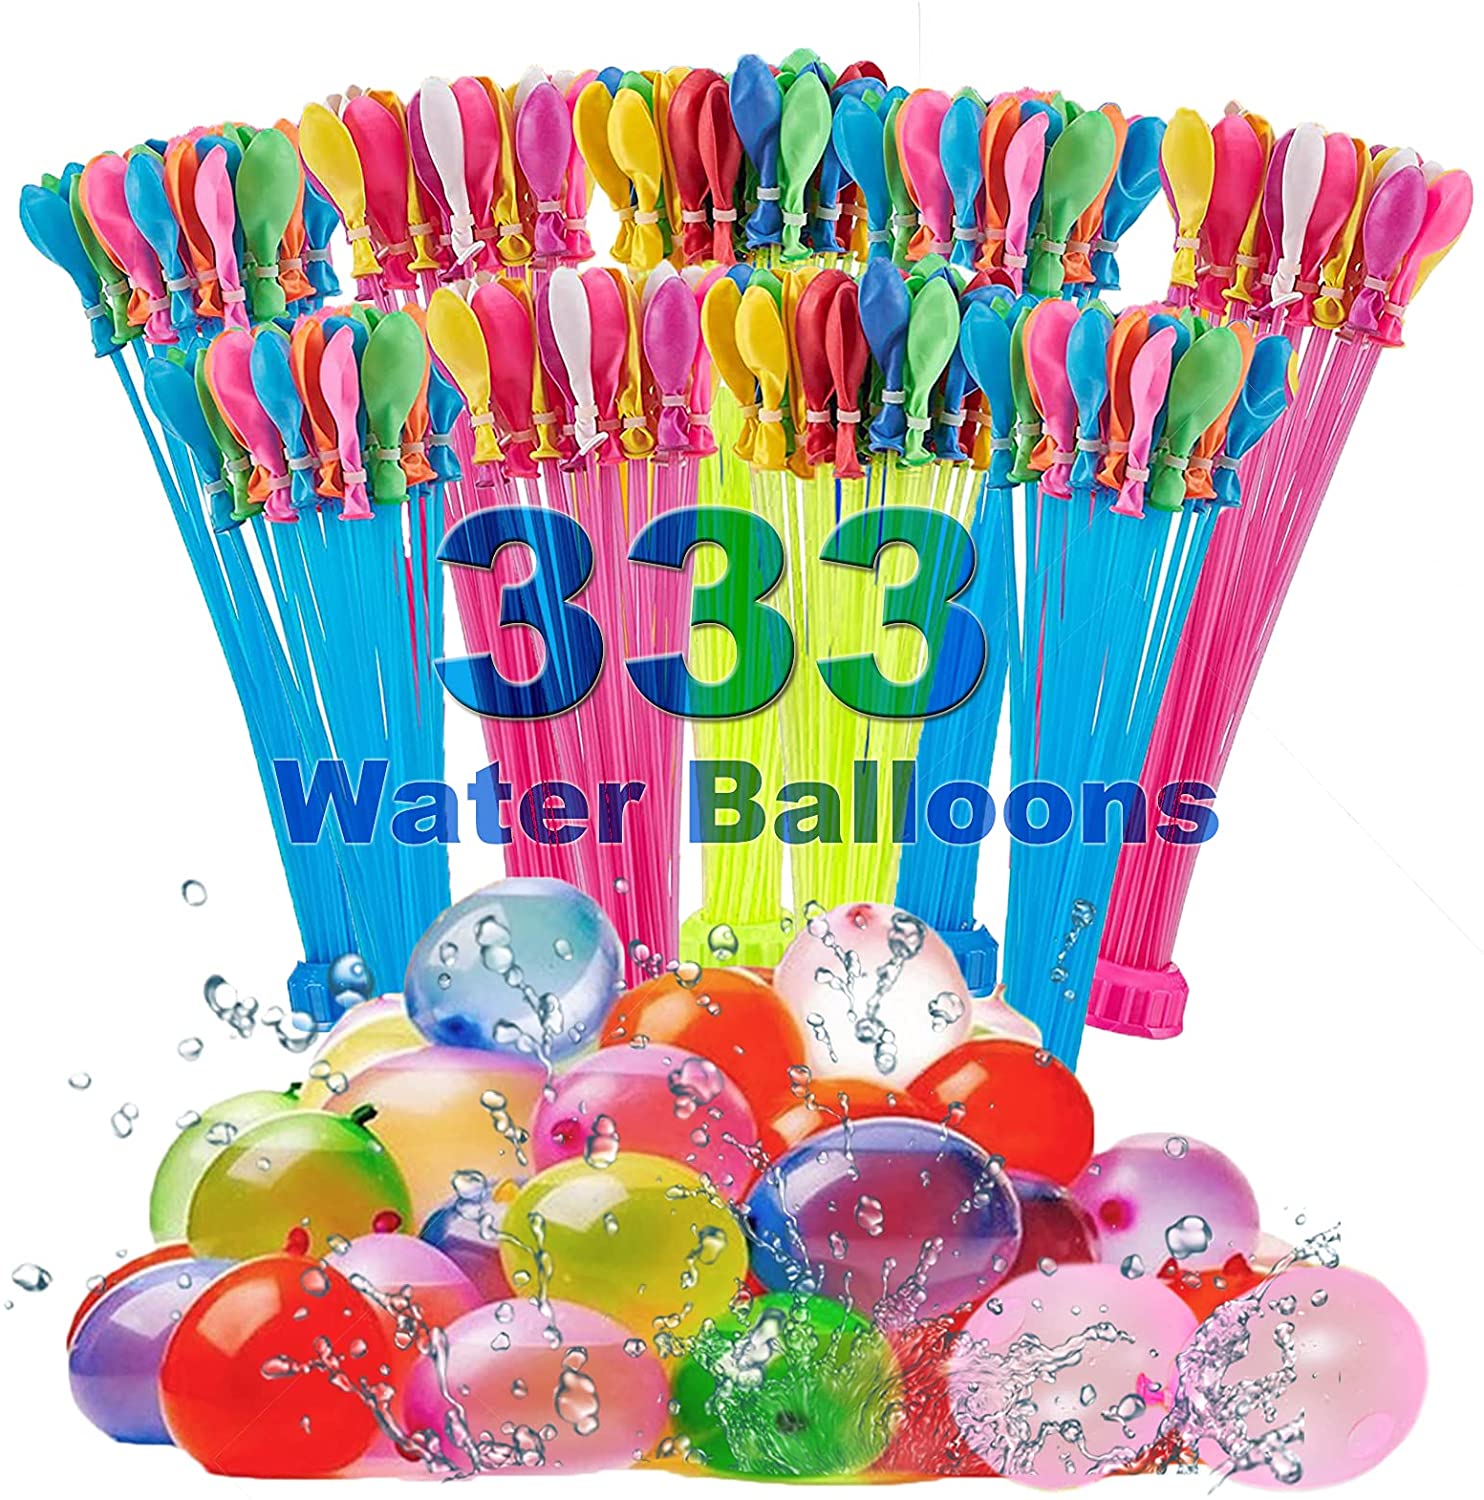 Outdoor Summer Fun 111 balloons in 60 Seconds Splash Fun Self-Sealing Water Balloons by MMkidz 333 Rapid Fill Water Balloons Multi-coloured 9 Bunch of 37 Balloons 